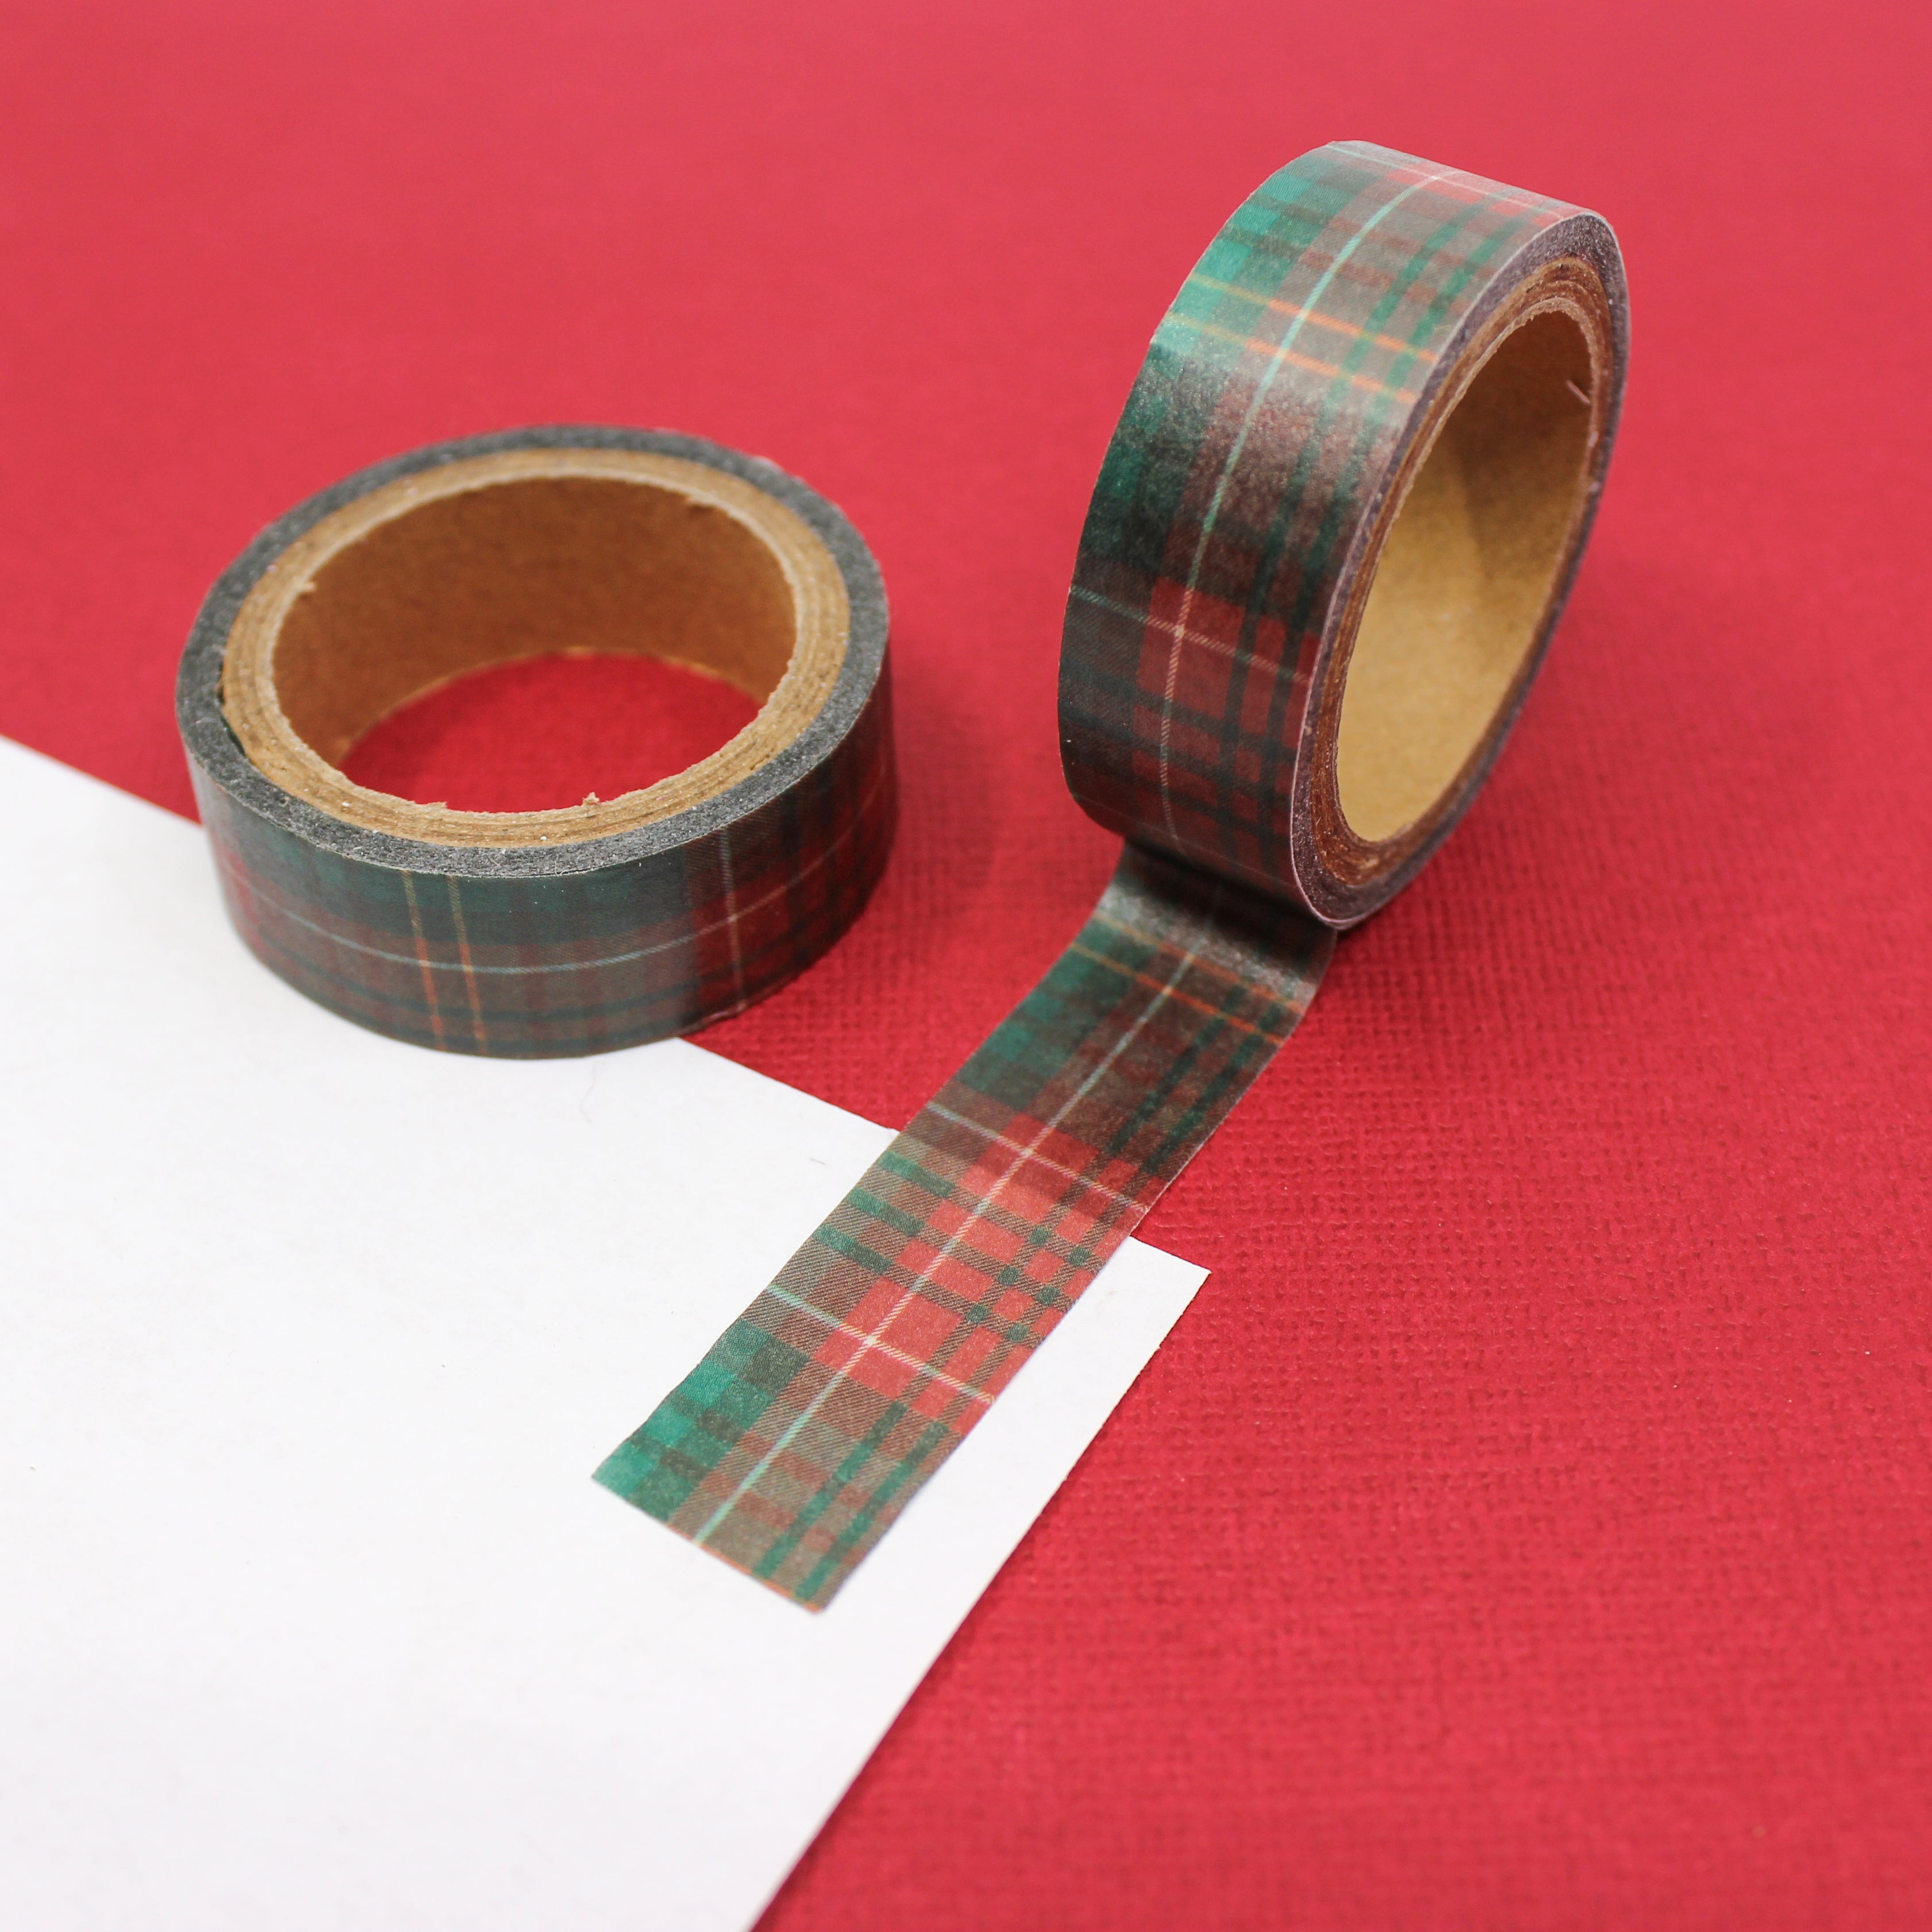 Celebrate the holiday season with our red and green holiday plaid washi tape, featuring a classic plaid pattern in festive Christmas colors, perfect for adding a touch of timeless holiday charm to your crafts. This tape is sold at BBB Supplies Craft Shop.